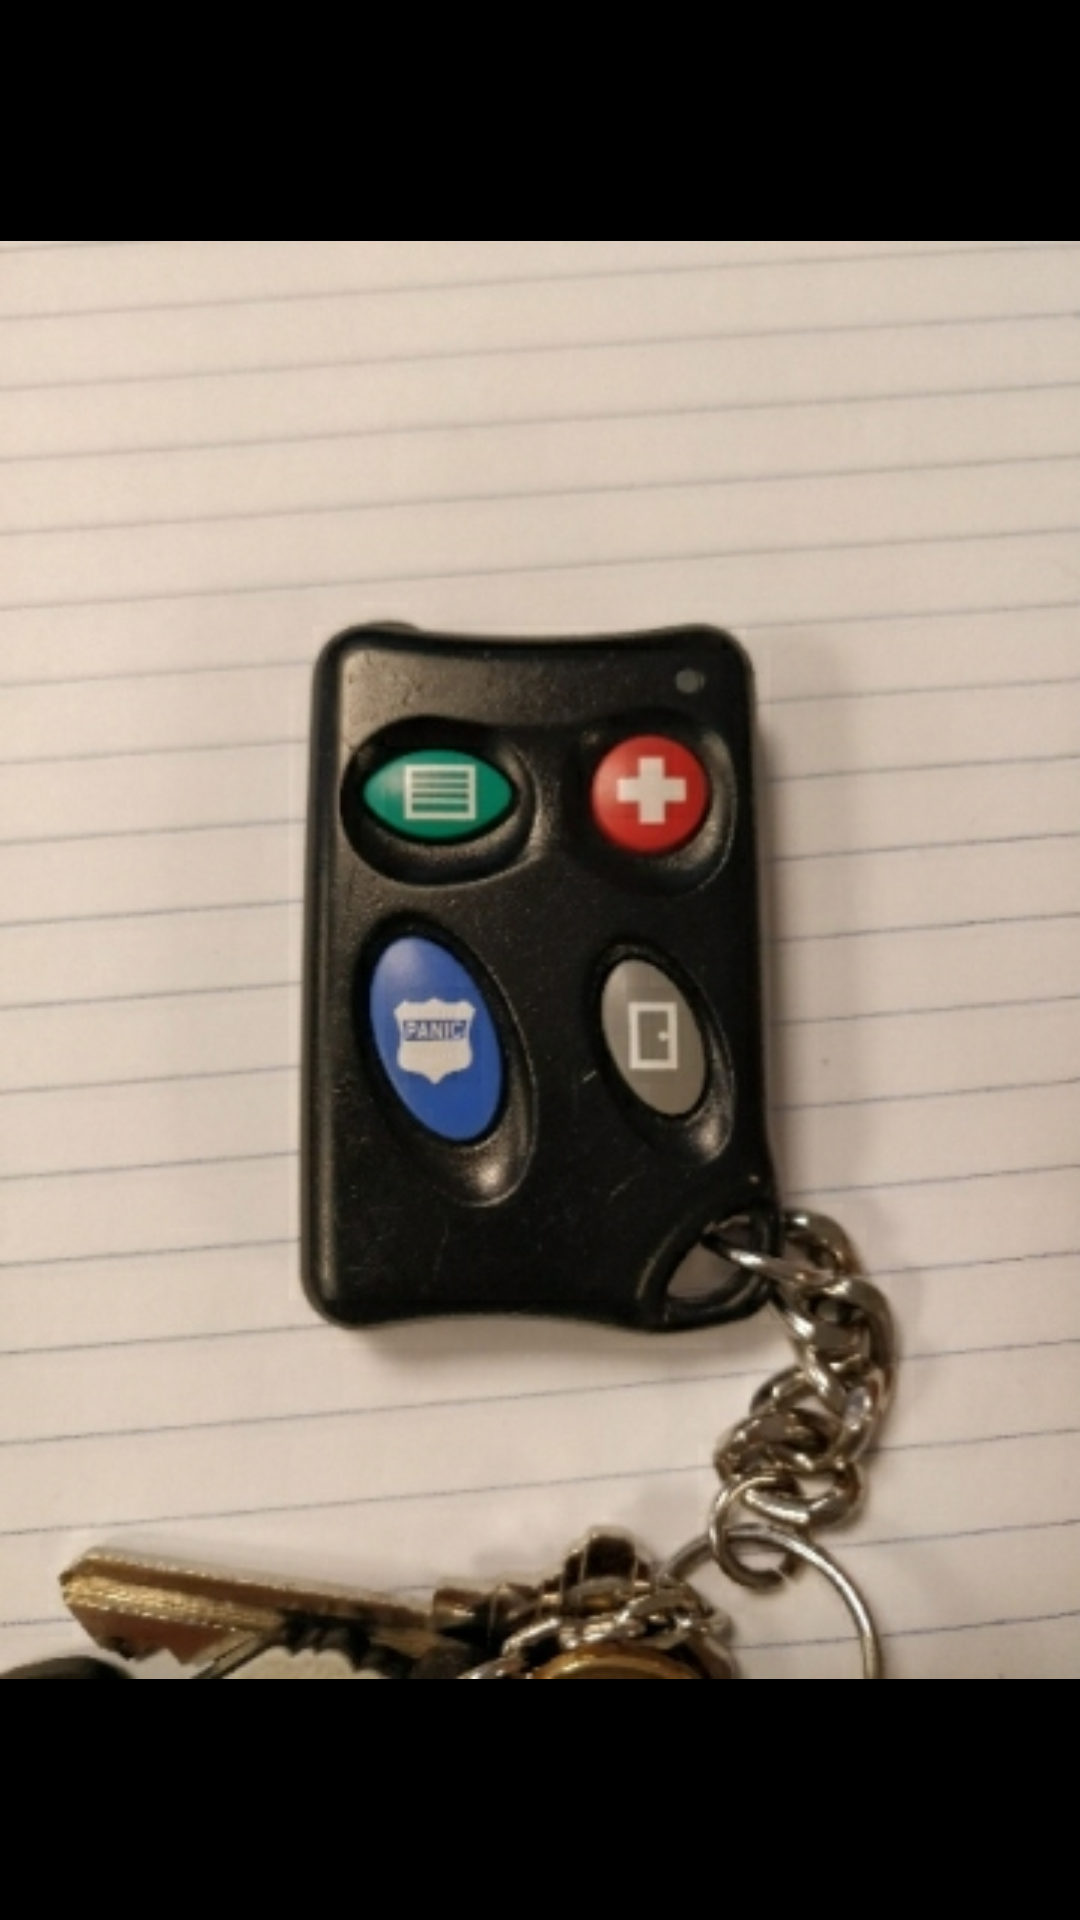 button fob of key fobs plastic rfid em 410x fob key copy clone service duplicate replace replacement copying 